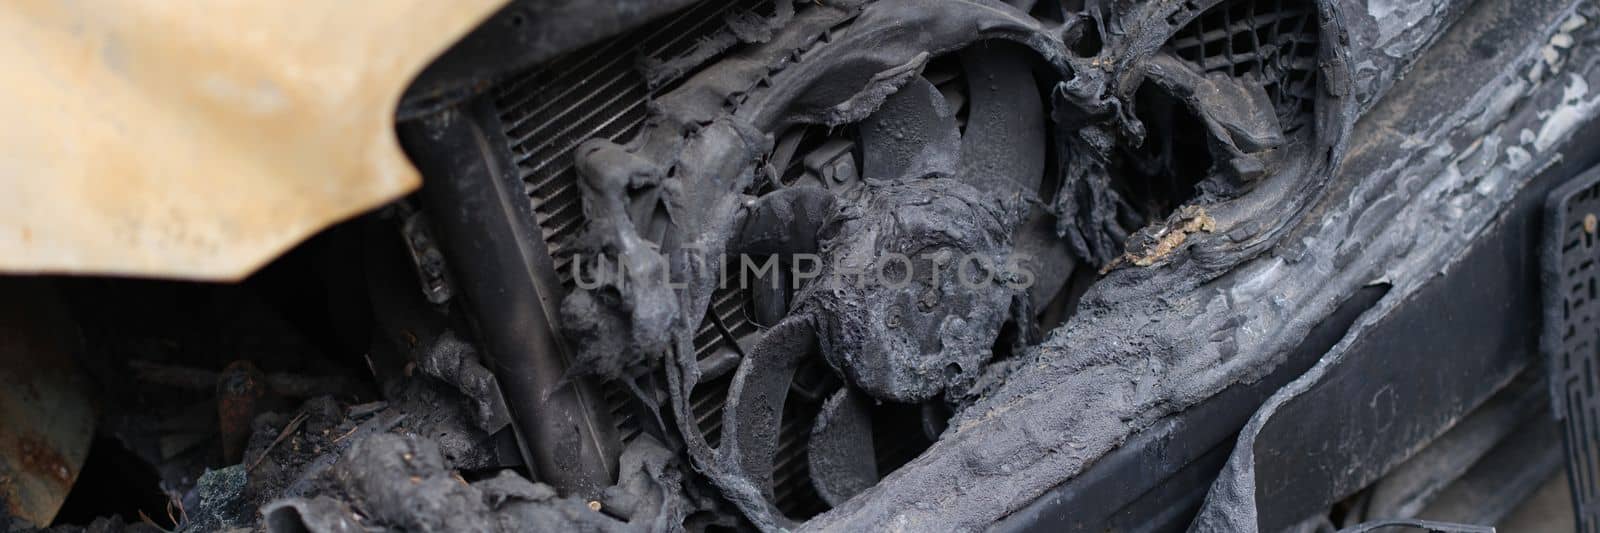 Burnt out car and faulty car wiring by kuprevich